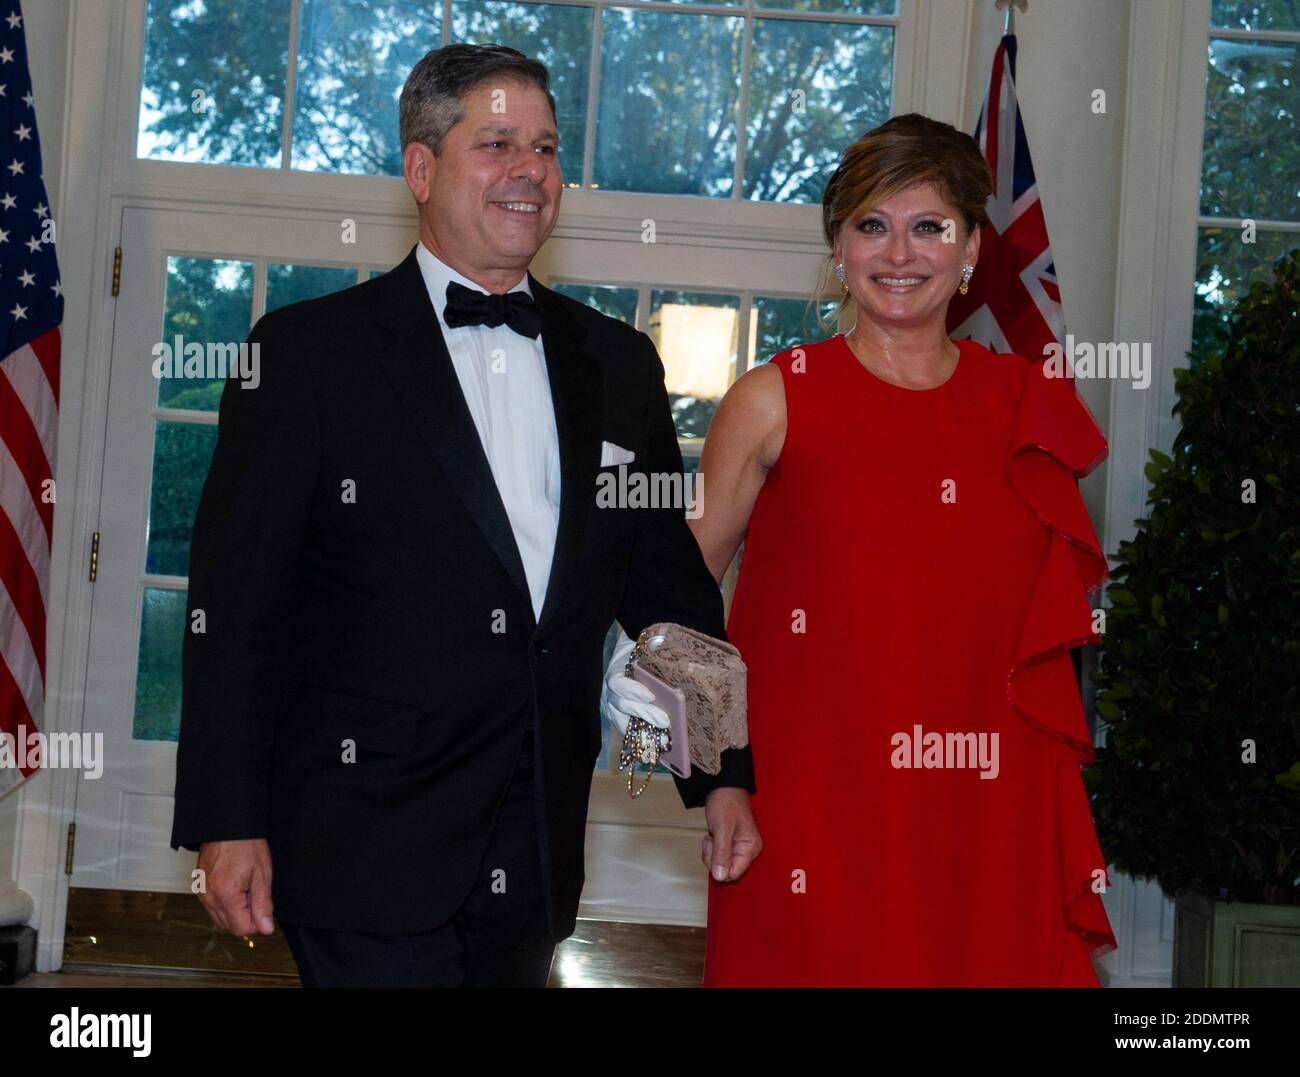 Maria Bartiromo and Jonathan Steinberg arrive for the State Dinner hosted by United States President Donald J. Trump and First lady Melania Trump in honor of Prime Minister Scott Morrison of Australia and his wife, Jenny Morrison, at the White House in Washington, DC on Friday, September 20, 2019.Photo by Ron Sachs / Pool via CNP/ABACAPRESS.COM Stock Photo